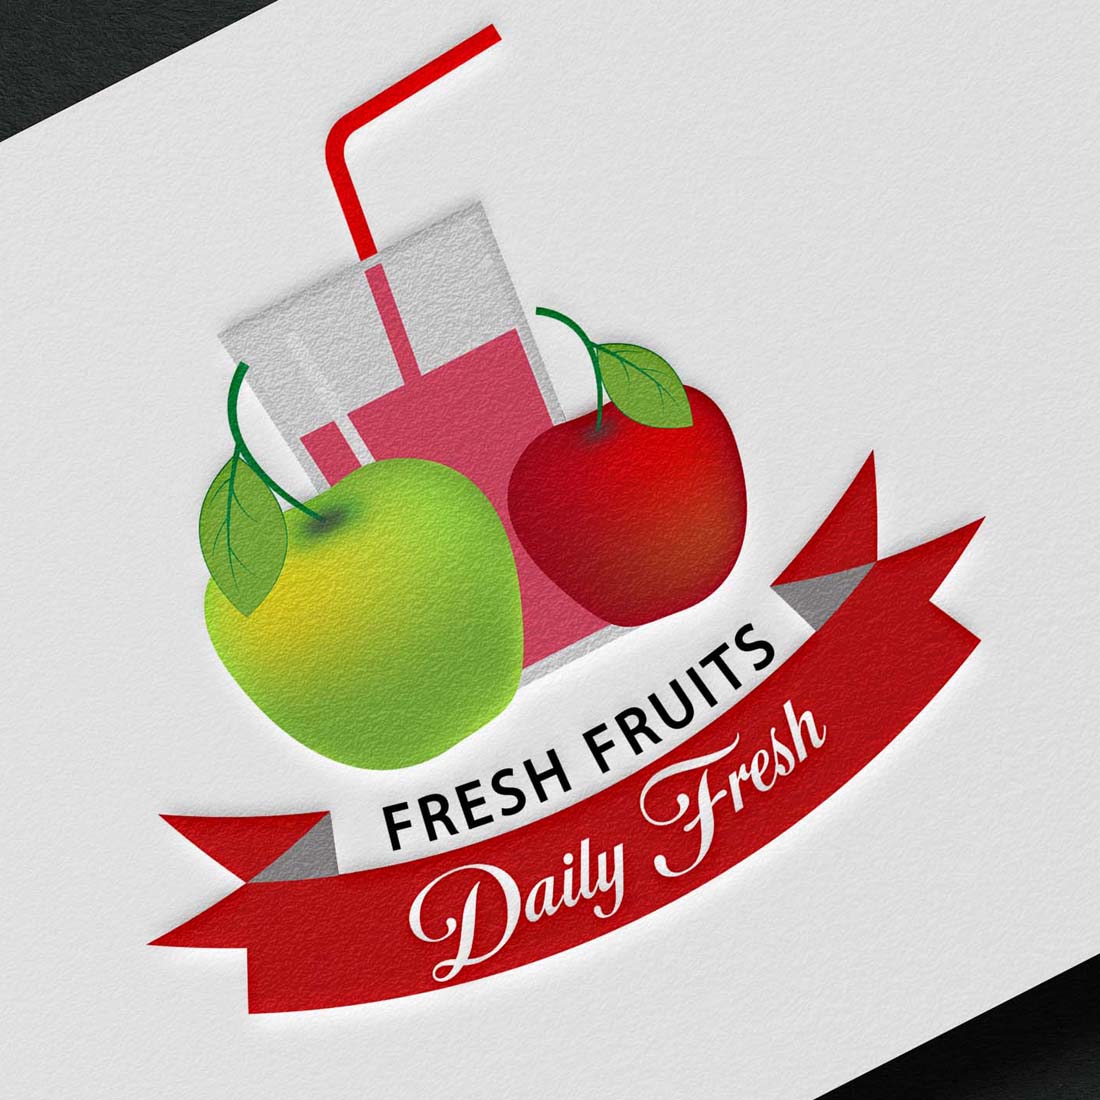 Nature's Best: 100% editable logo design of hand-picked fresh fruit for your enjoyment cover image.